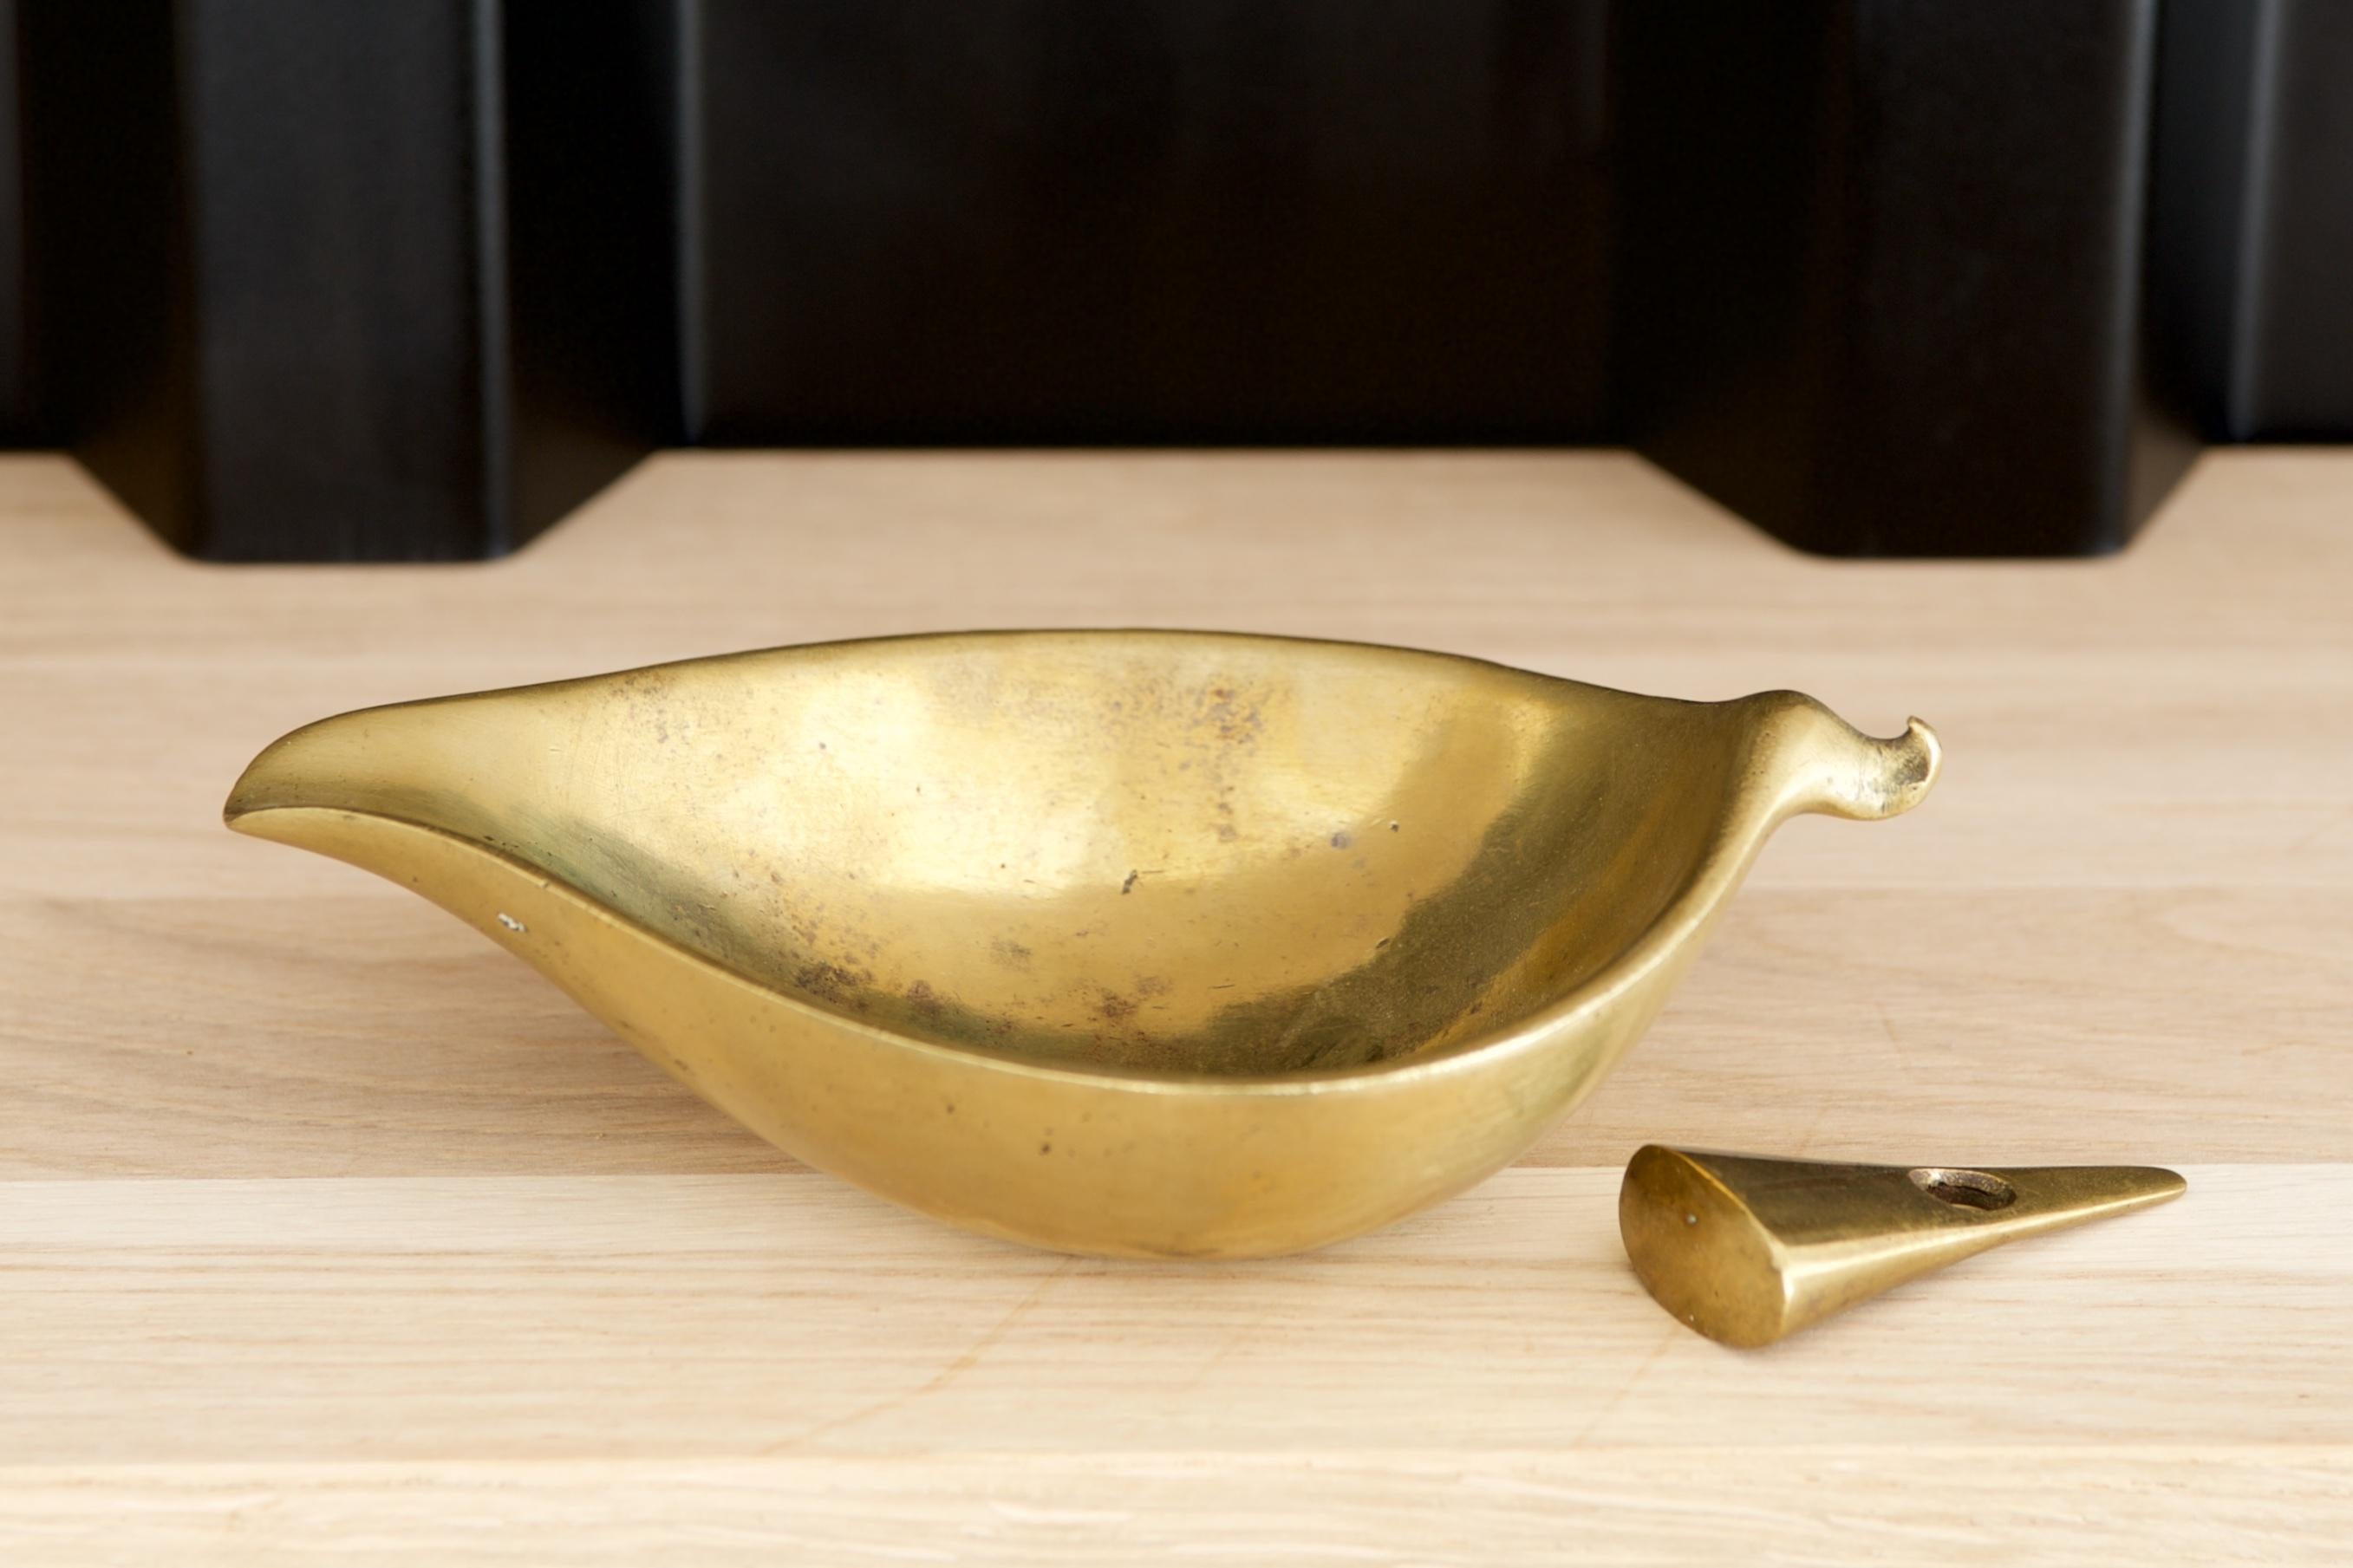 Ashtray with a Snuffer, No. 3515
Designed 1947 by Carl Auböck

Cast brass
16 x 10 cm, h 6.7 cm / 6.3 x 3.93 in, h 2.44 in

Original, vintage piece!
Good condition with traces of aging and usage.

Literature: Clemens Kois; Carl Auböck -The